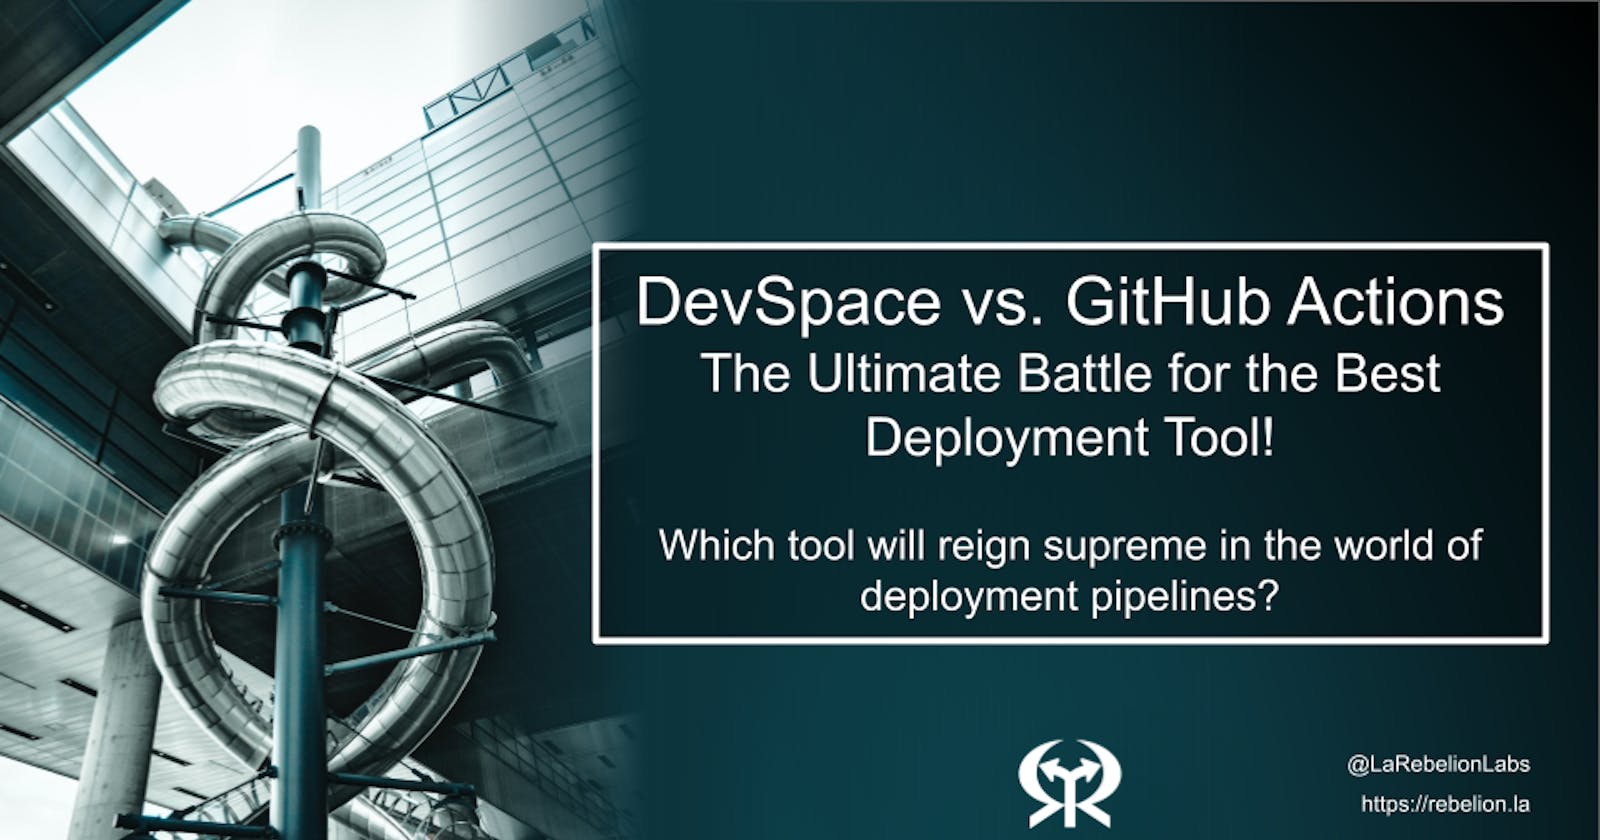 DevSpace vs. GitHub Actions: The Ultimate Battle for the Best Deployment Tool!